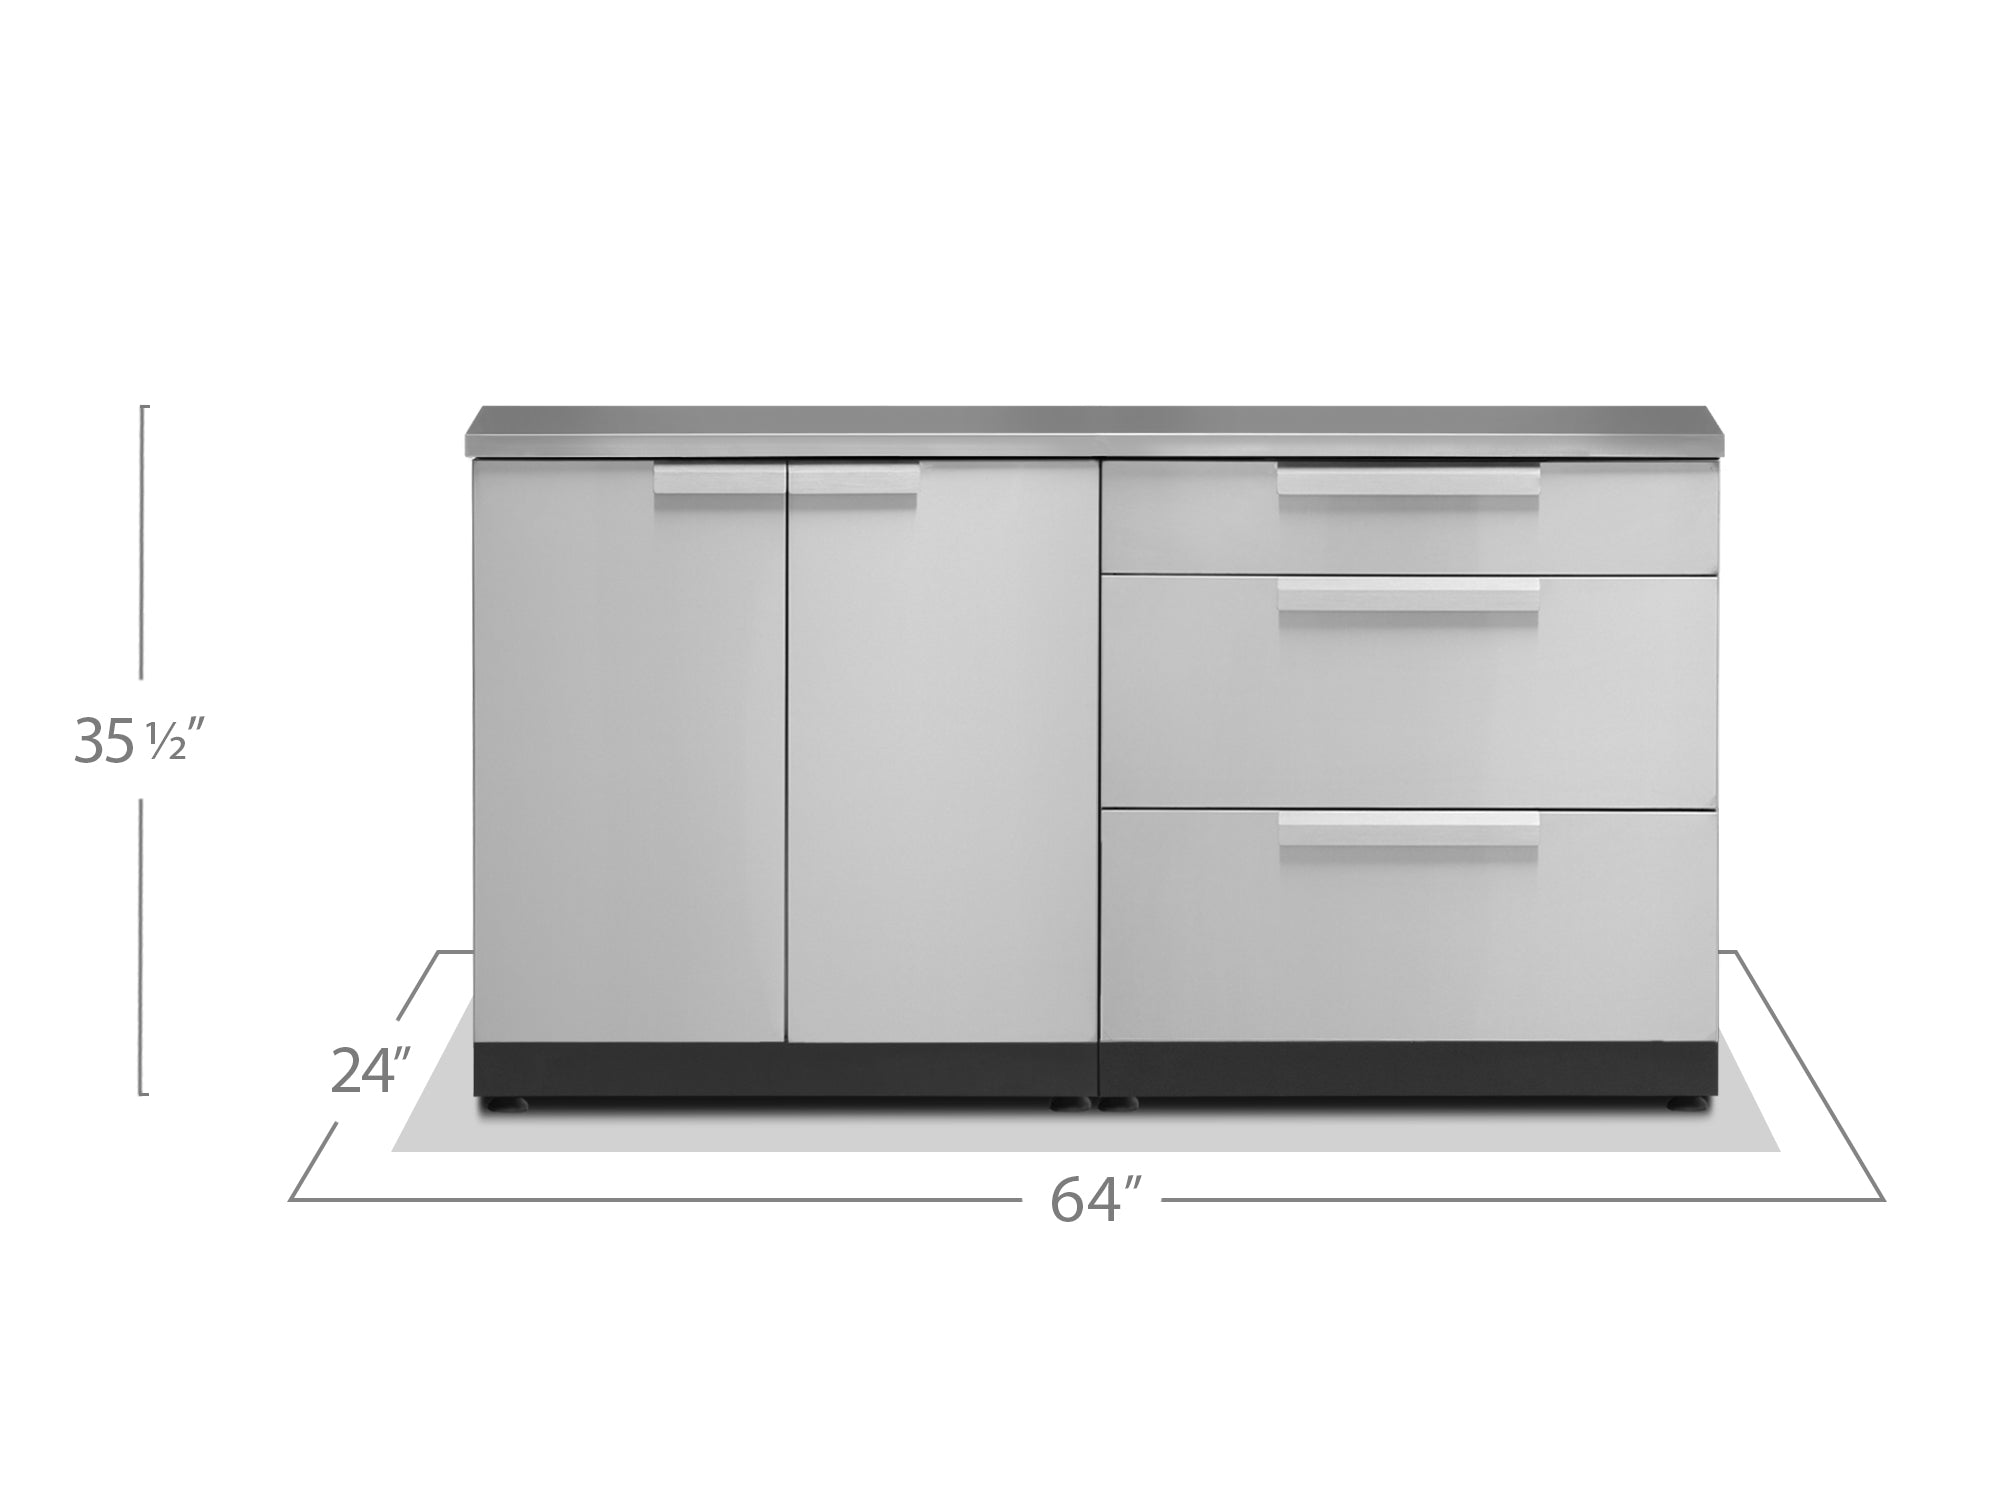 Newage Outdoor Kitchen 2 PC Cabinet Set in Stainless Steel - 65106